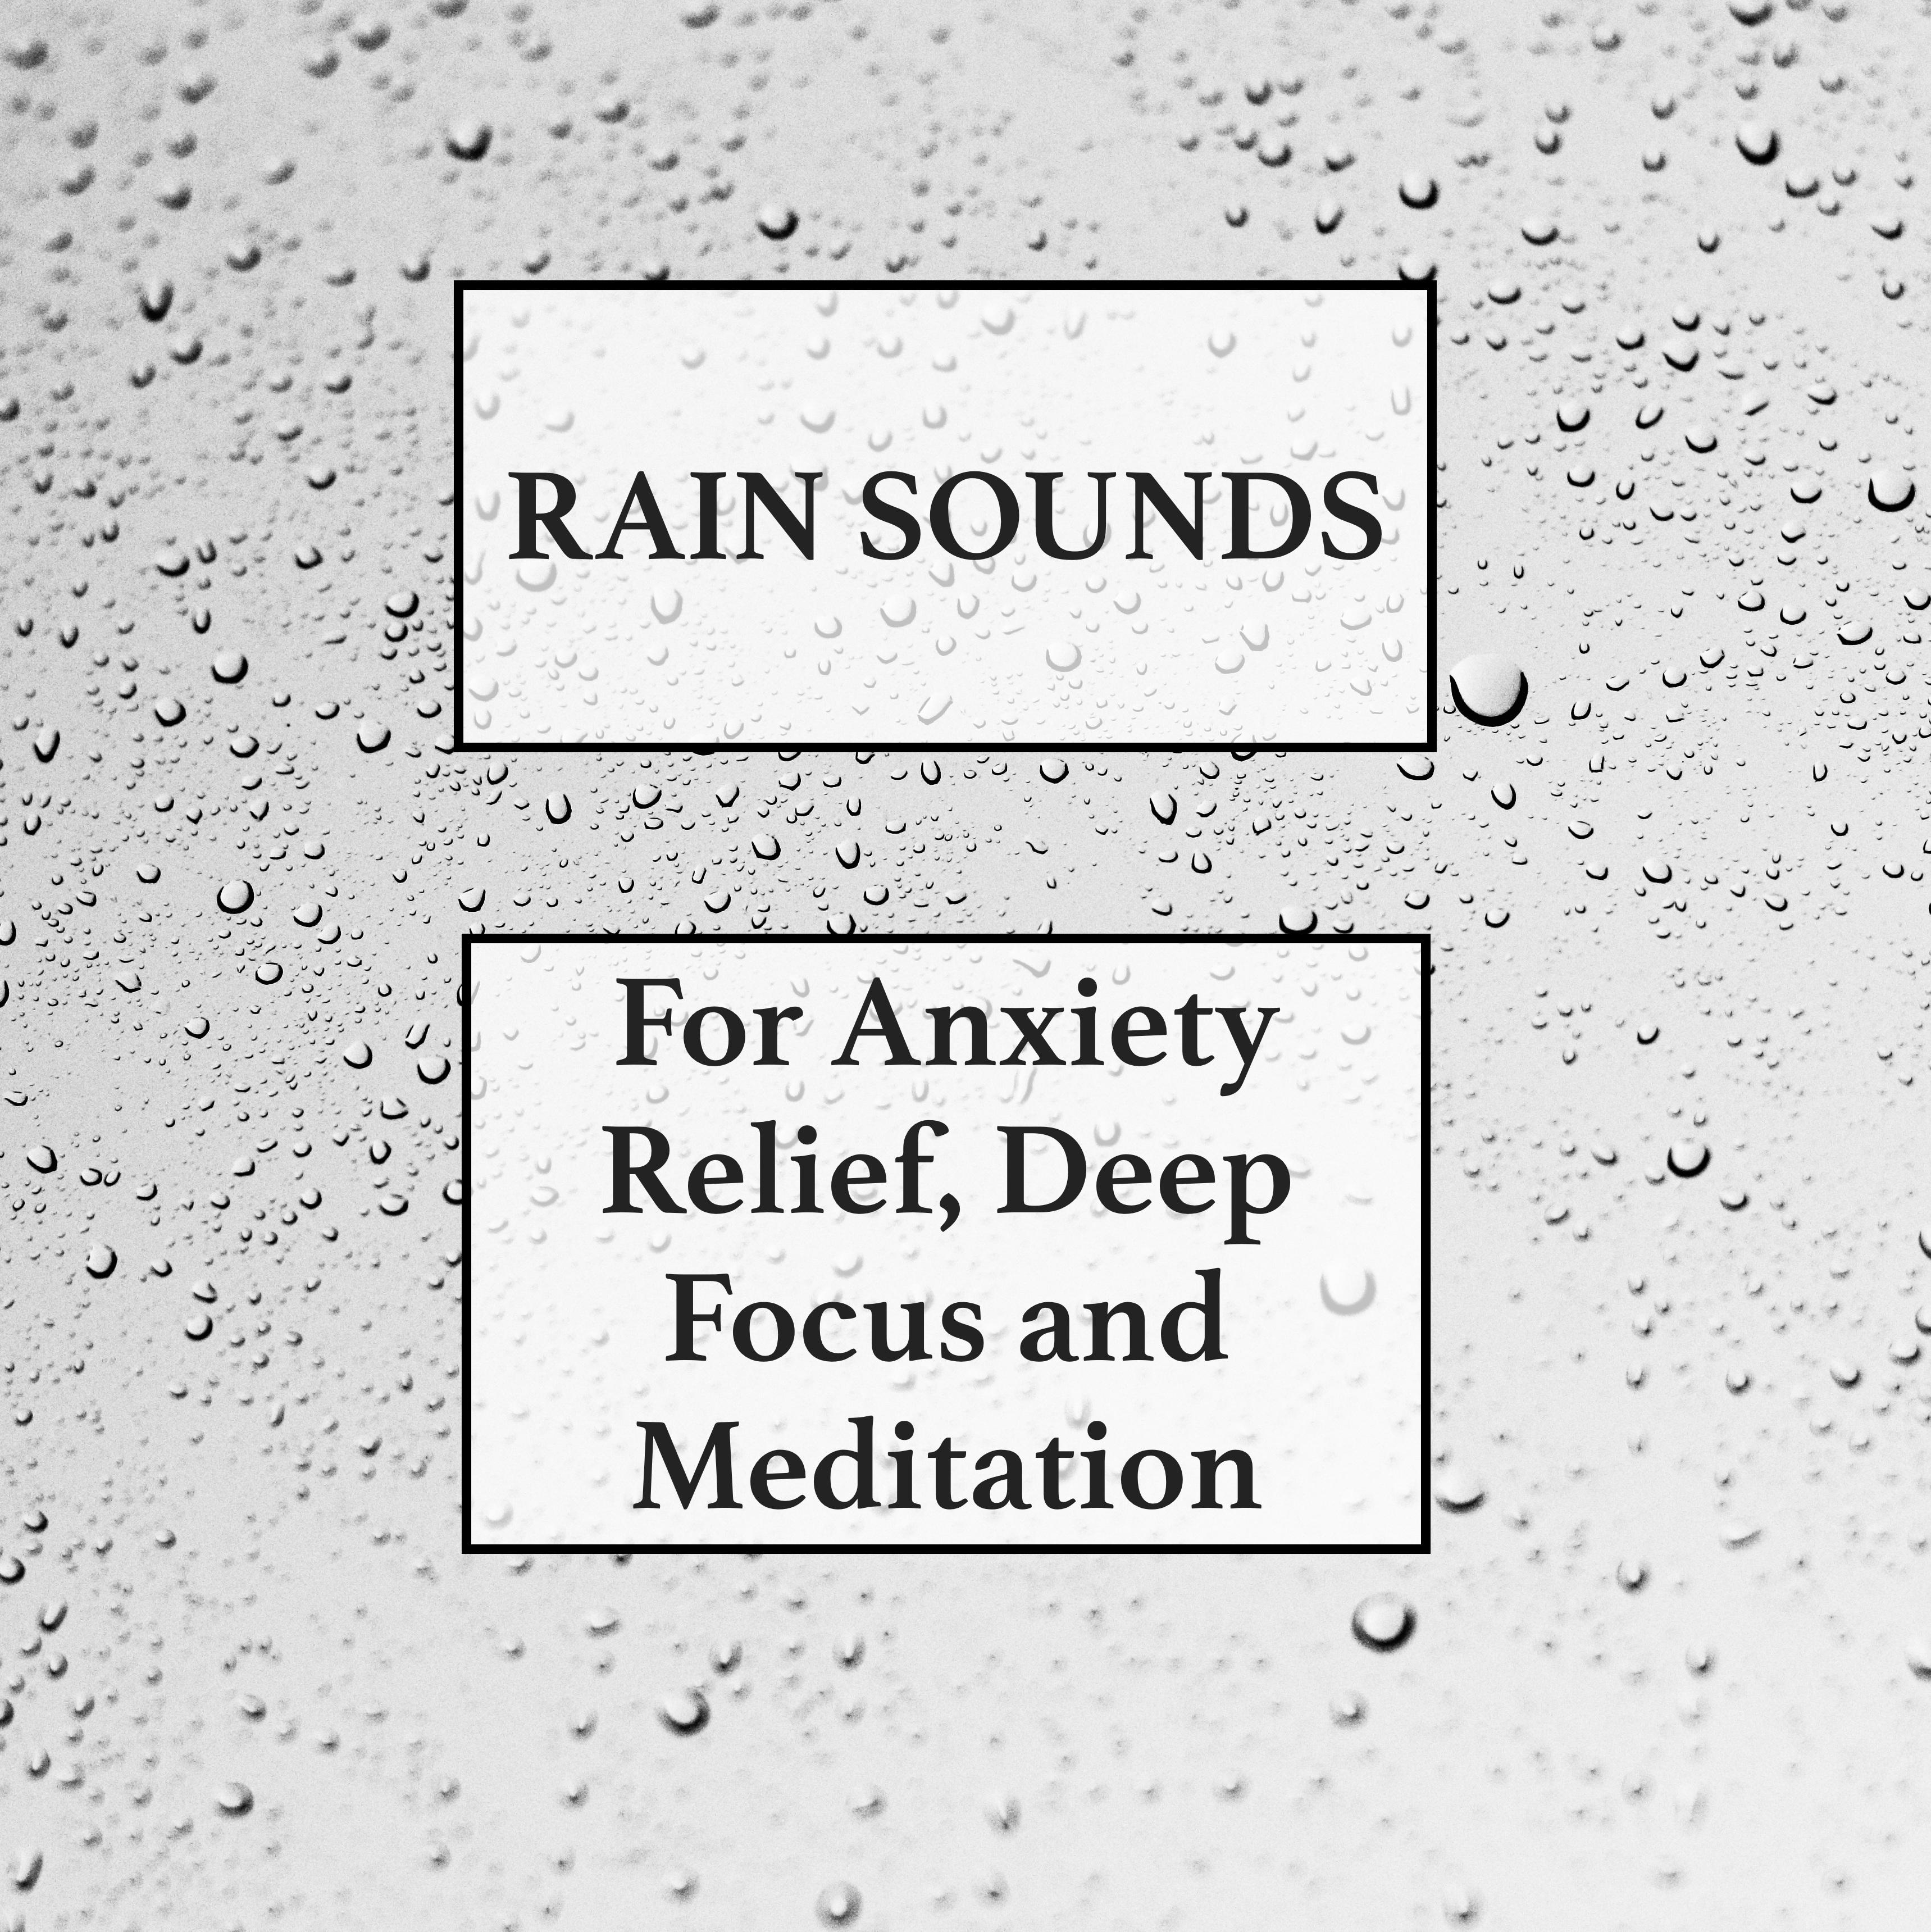 Gentle Rain Sounds Collection - Soothing Water and Nature Sounds for the Ultimate in Rest & Relaxation, Anxiety Relief, Stress-Free Living, Deep Focus & Mindfulness, and Help with Meditation and Exam Study